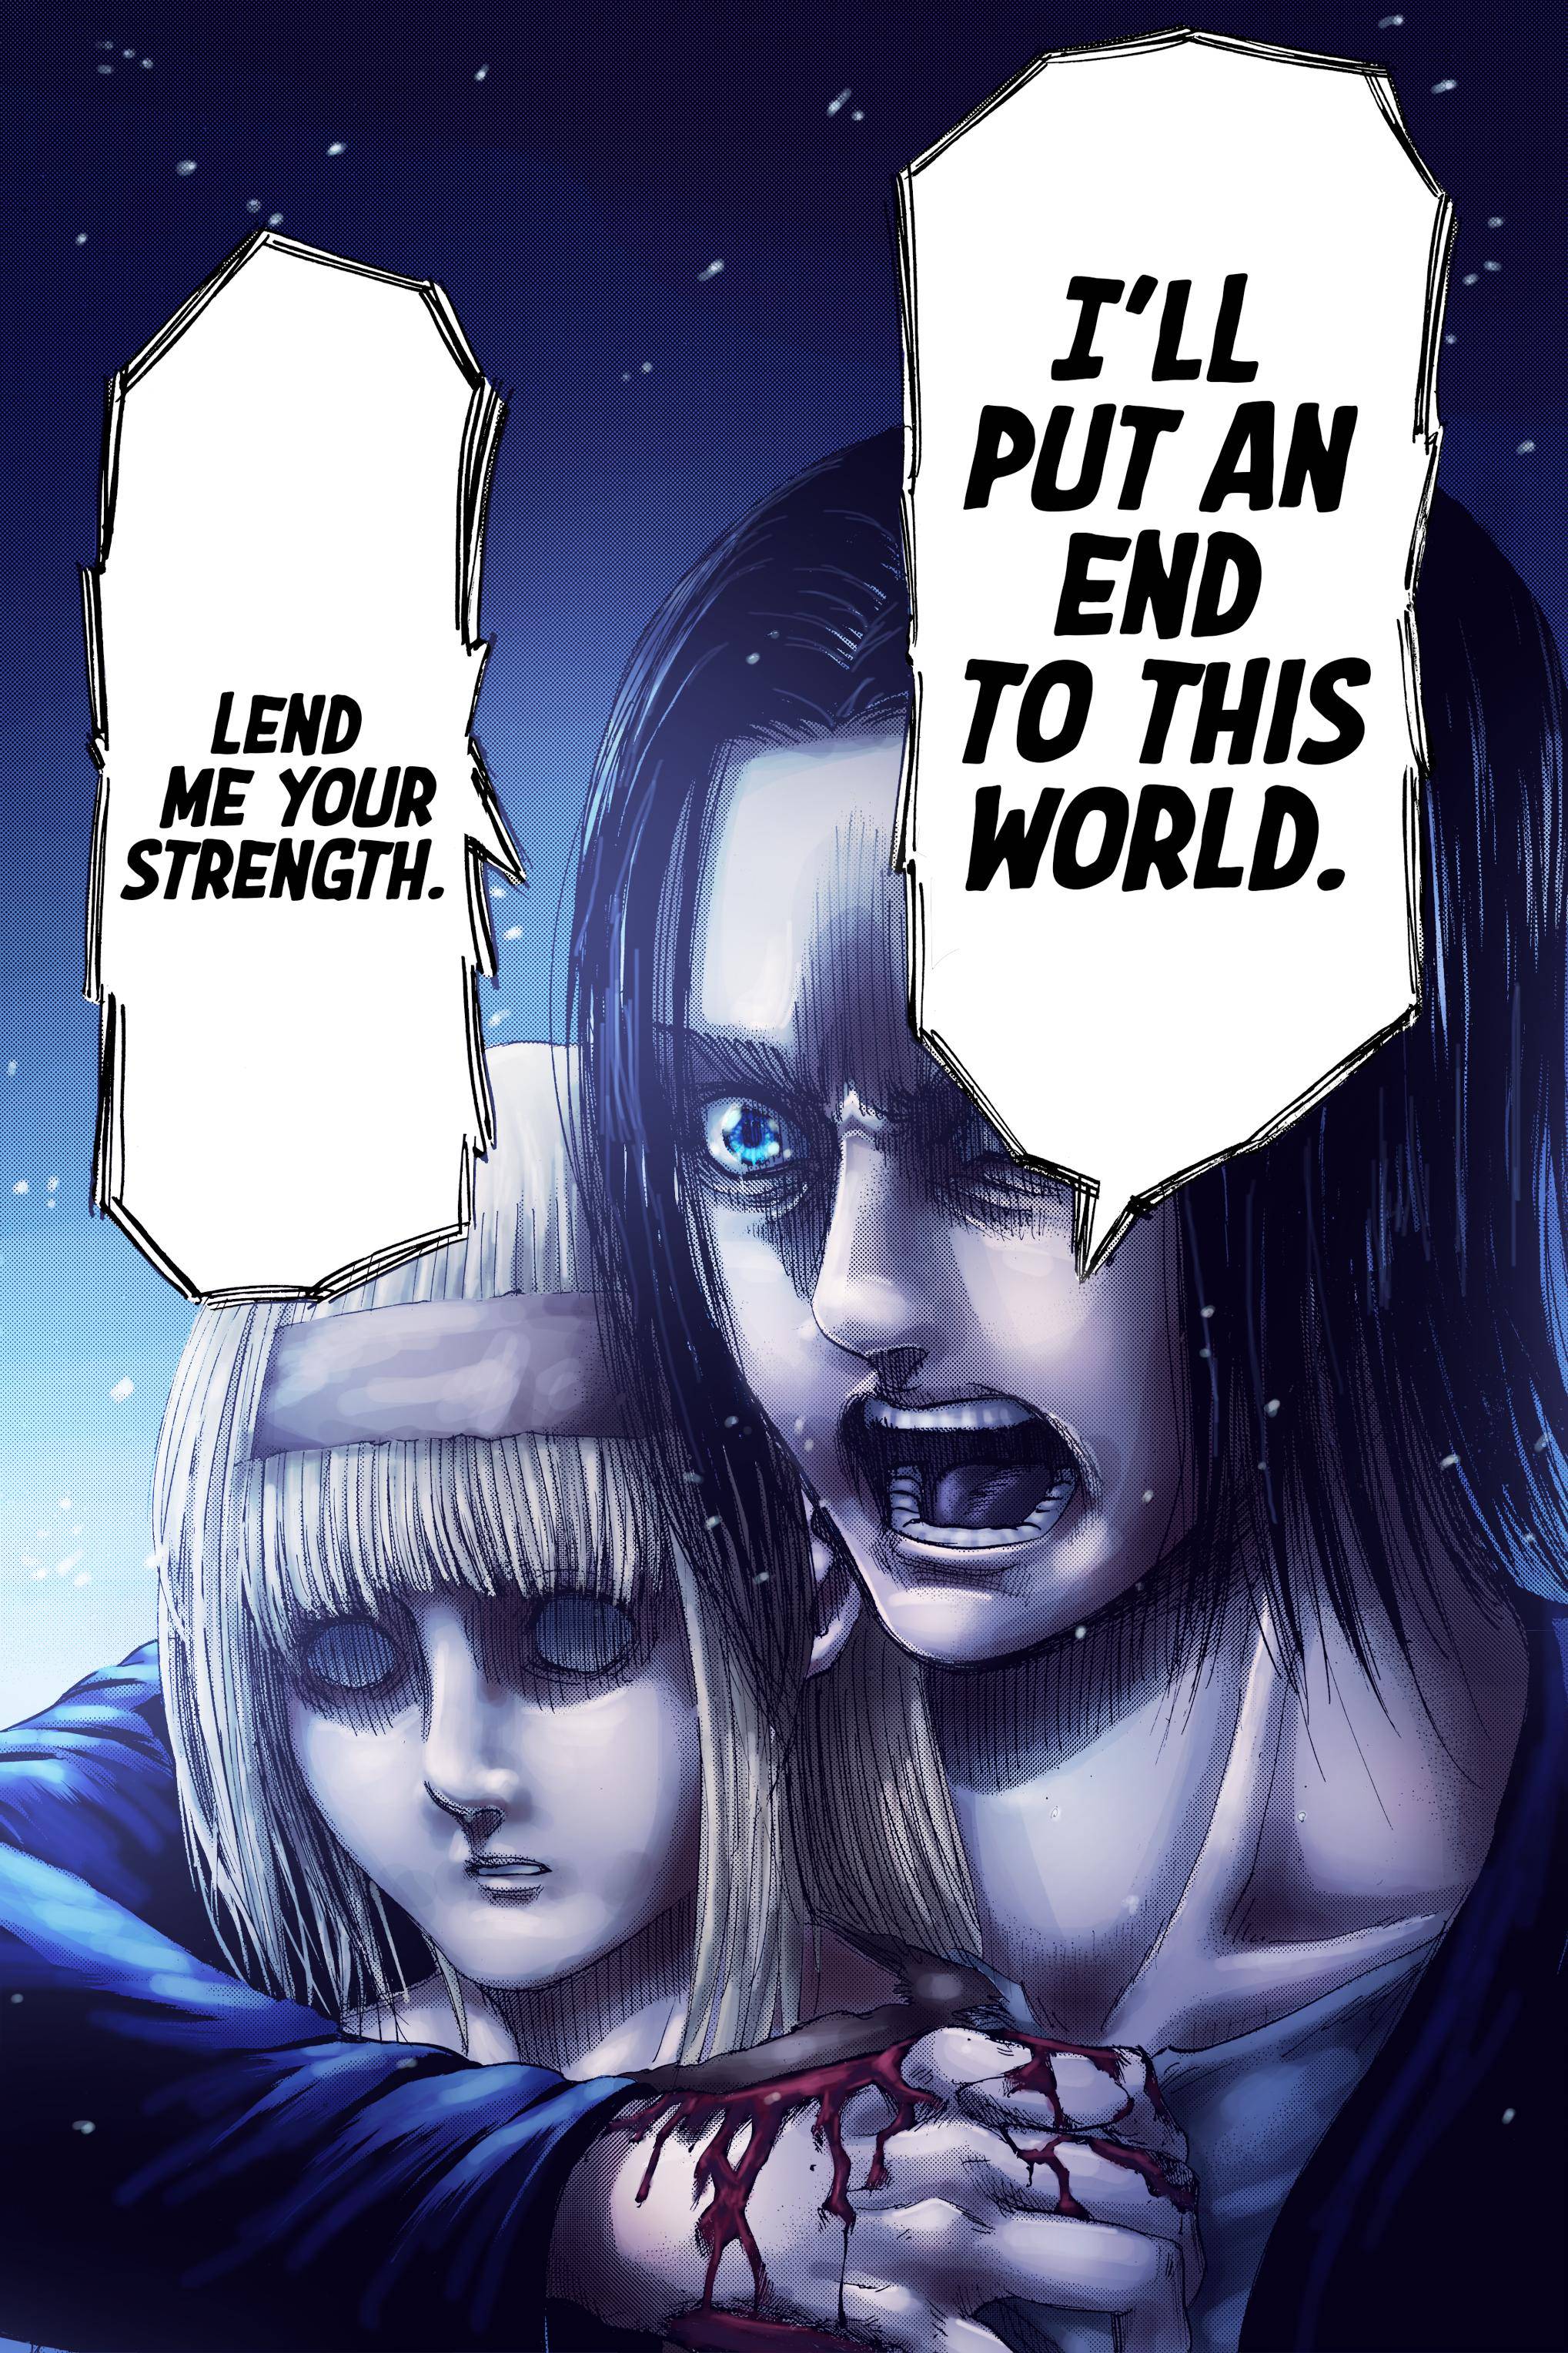 Grisha's decision to give the Attack Titan to Eren : r/ANRime